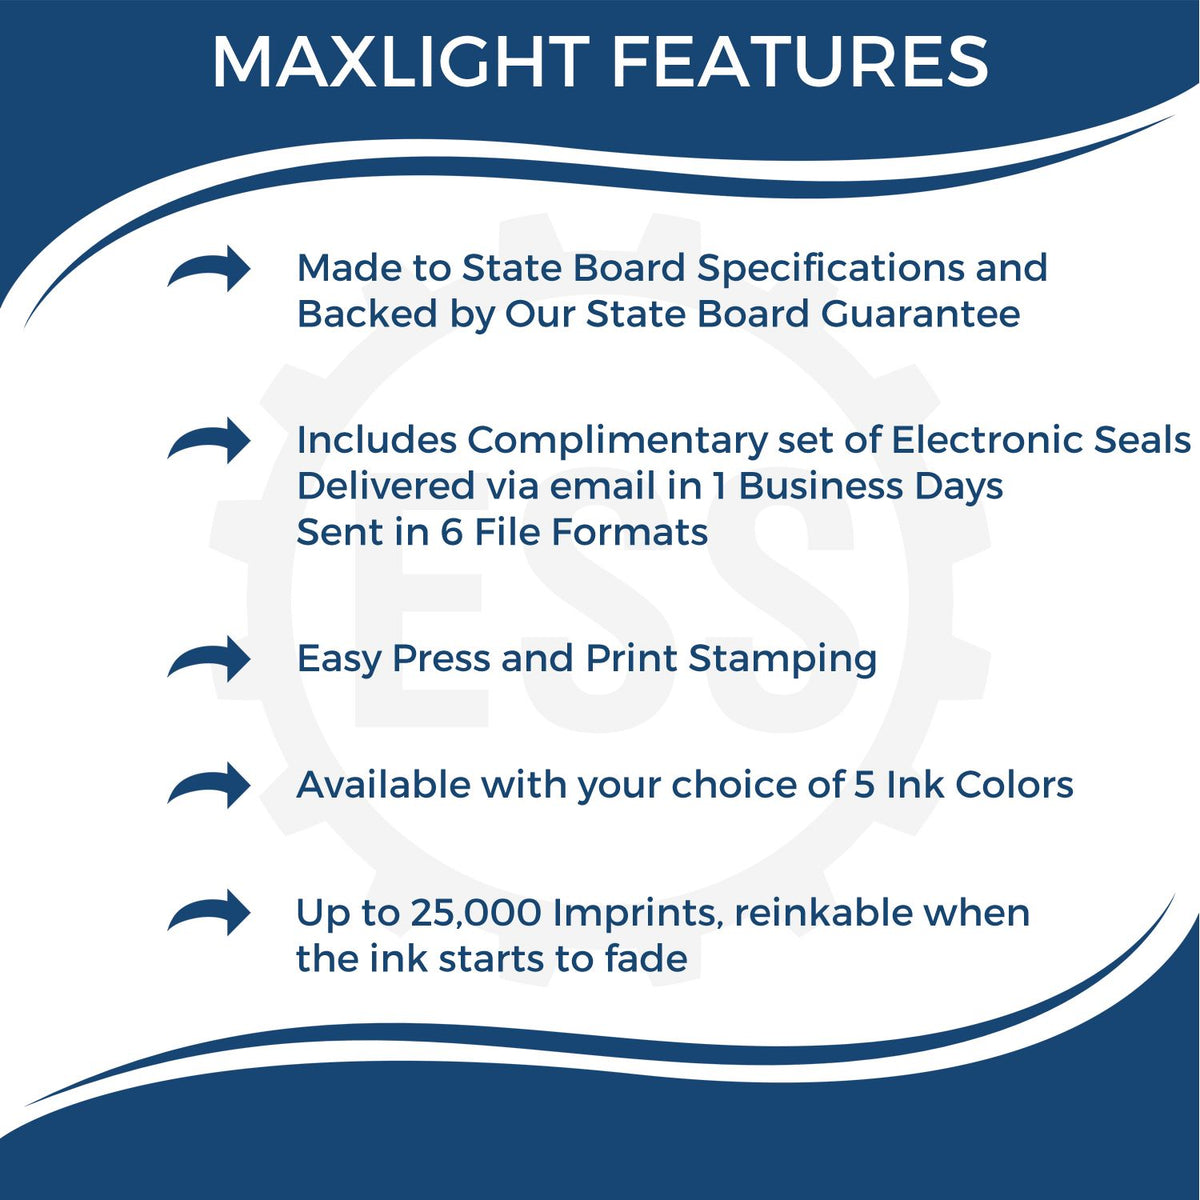 A picture of an infographic highlighting the selling points for the MaxLight Premium Pre-Inked Nebraska State Seal Notarial Stamp